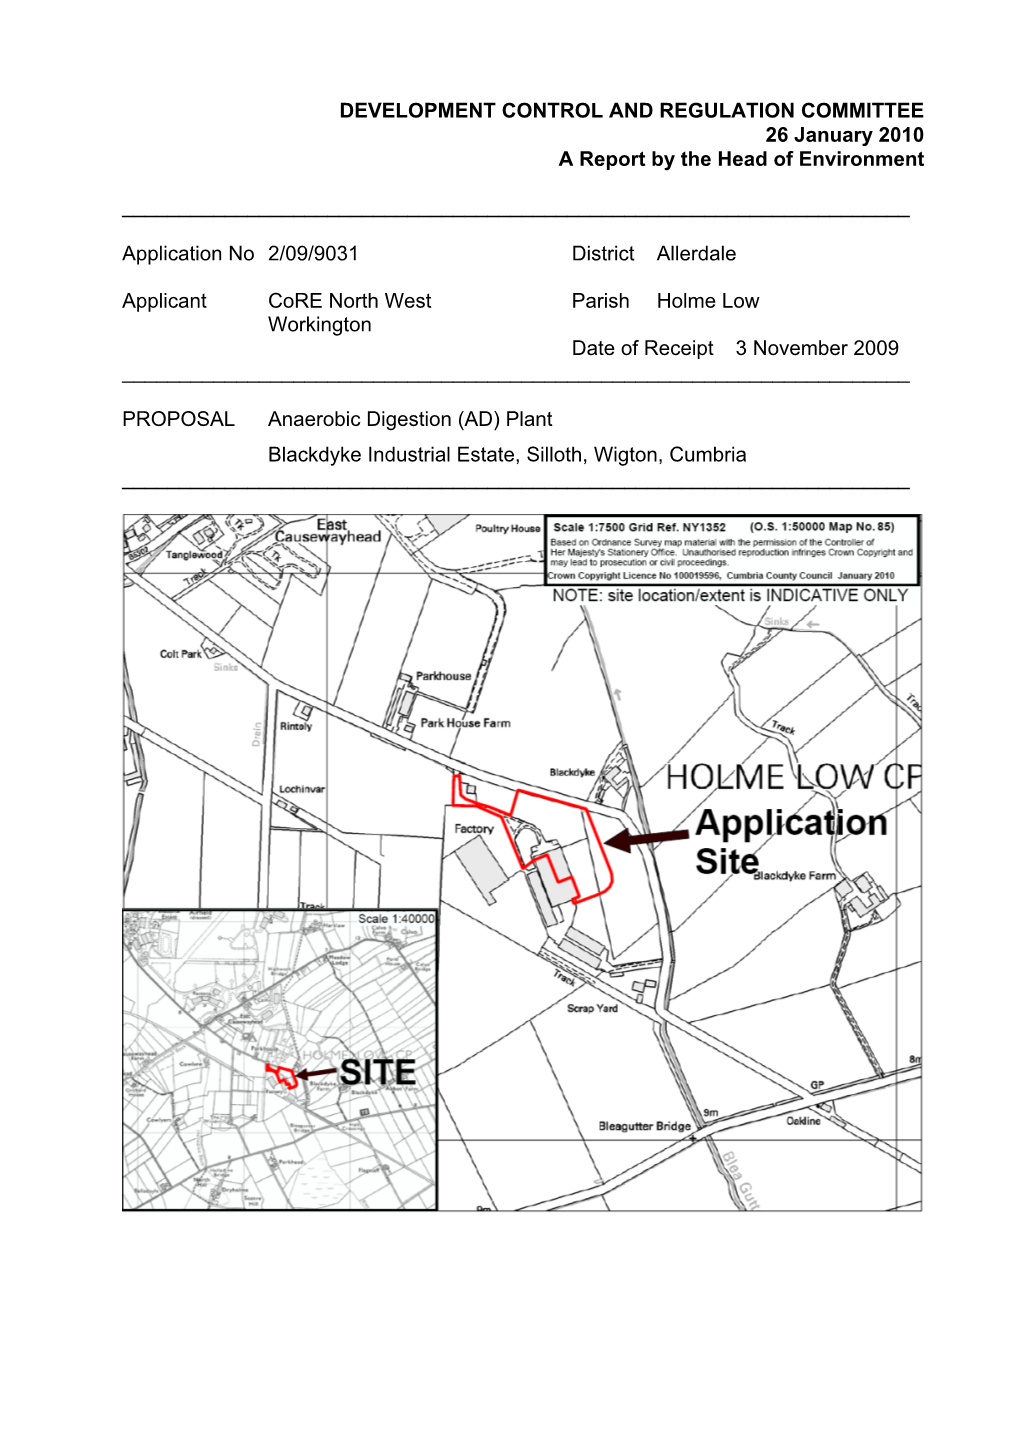 Planning Application No. 2-09-9031 Anaerobic Digestion (AD) Plant